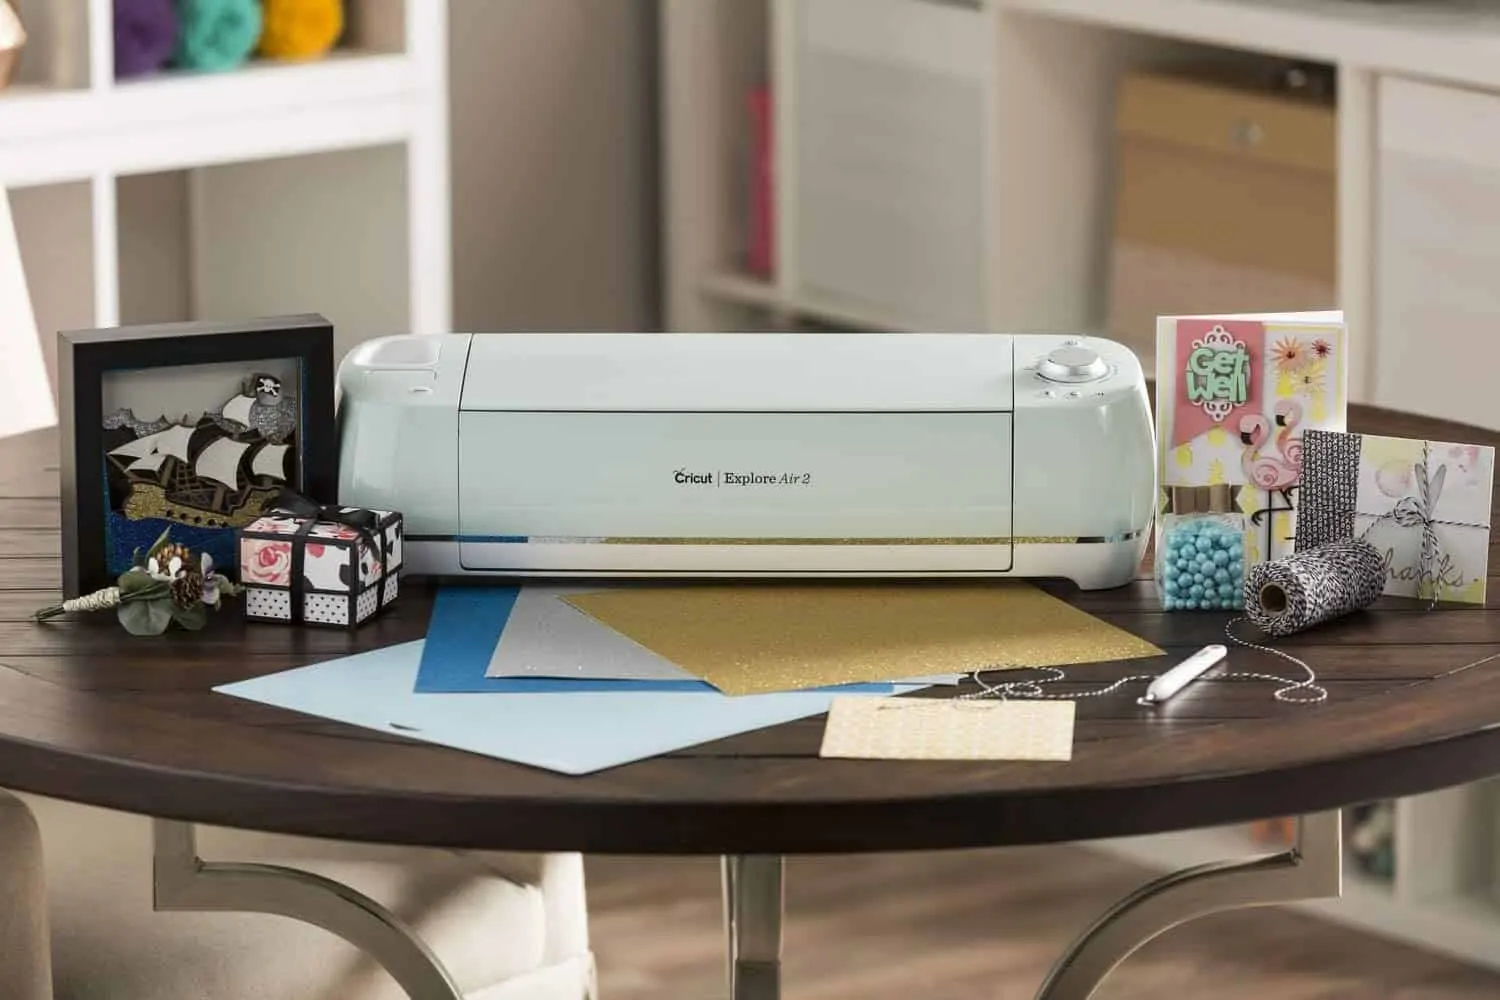 Cricut Explore Air on a crafting table surrounded by supplies.